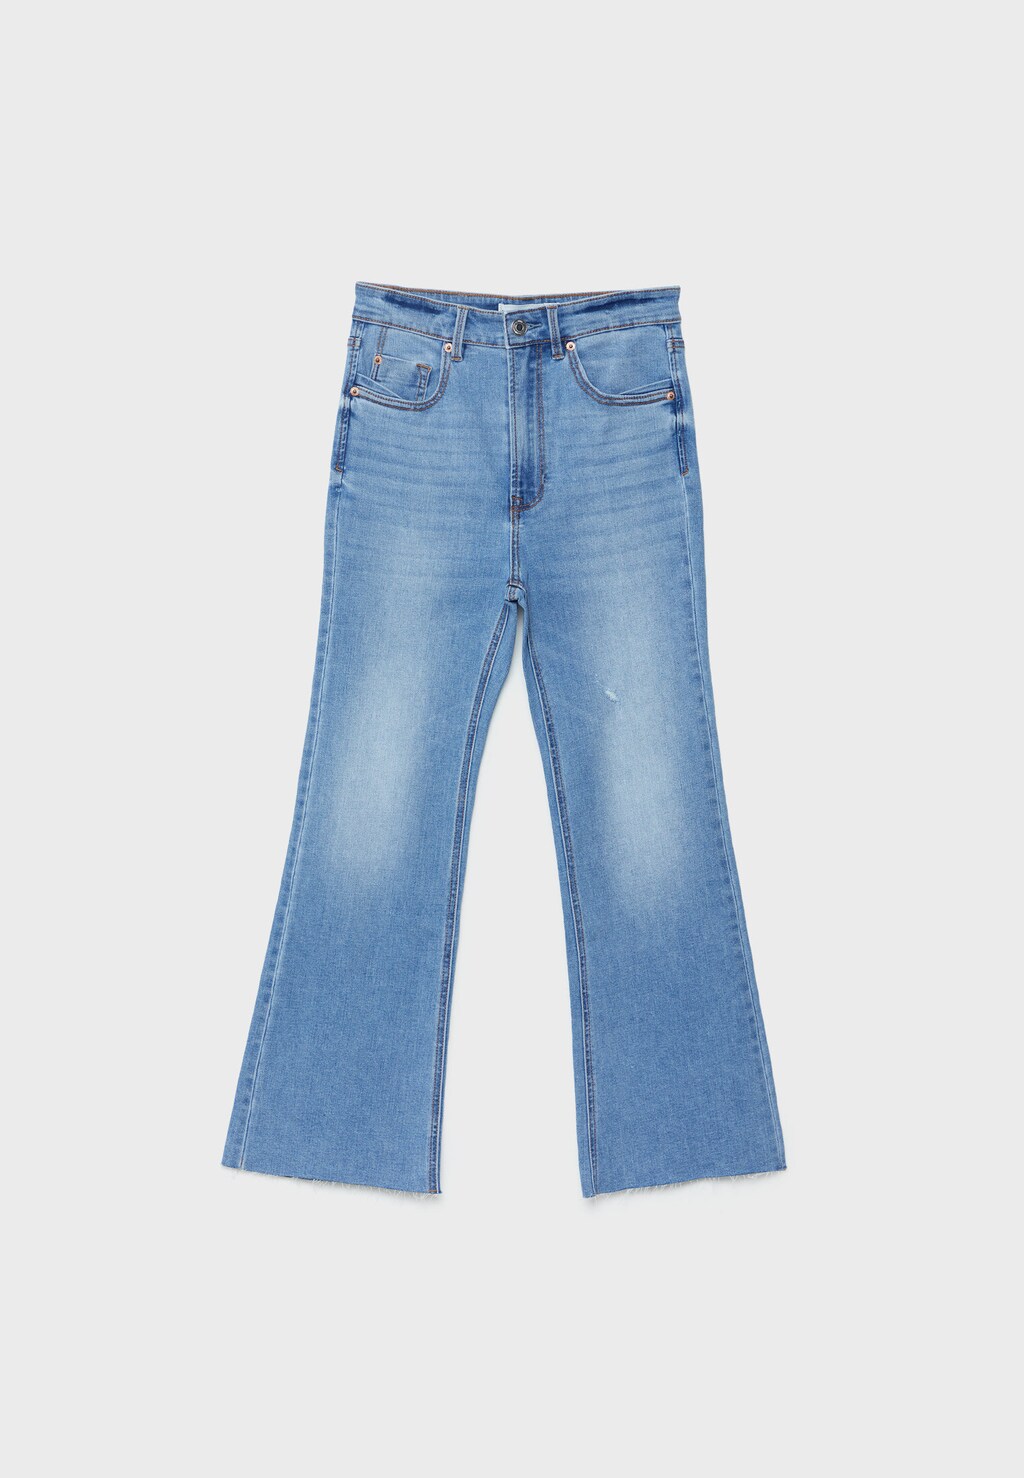 File:High Waisted Flare Jeans with a Blue Striped Shirt (17335953786).jpg -  Wikipedia